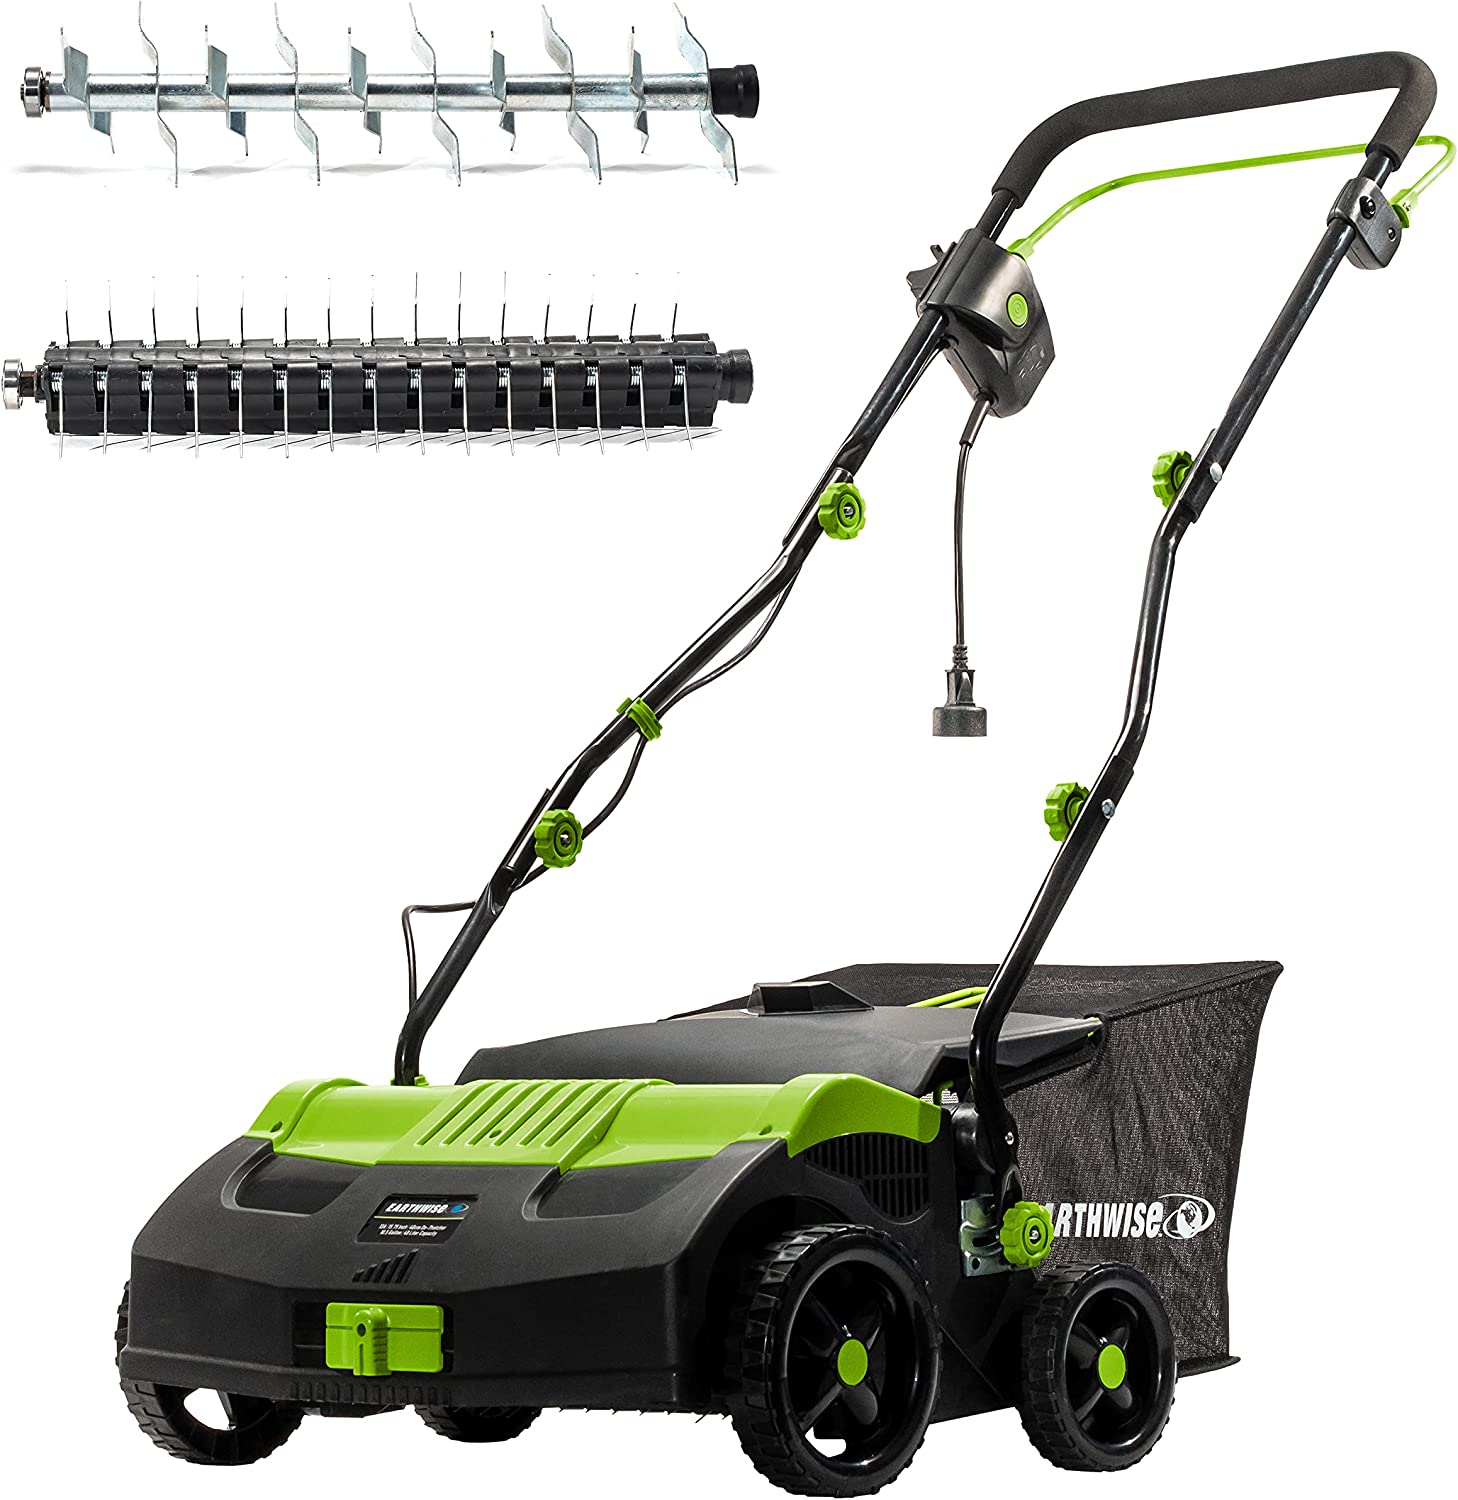 Earthwise DT71613AA 13-Amp 16-Inch Corded Dethatcher with Scarifier Blade and Collection Bag